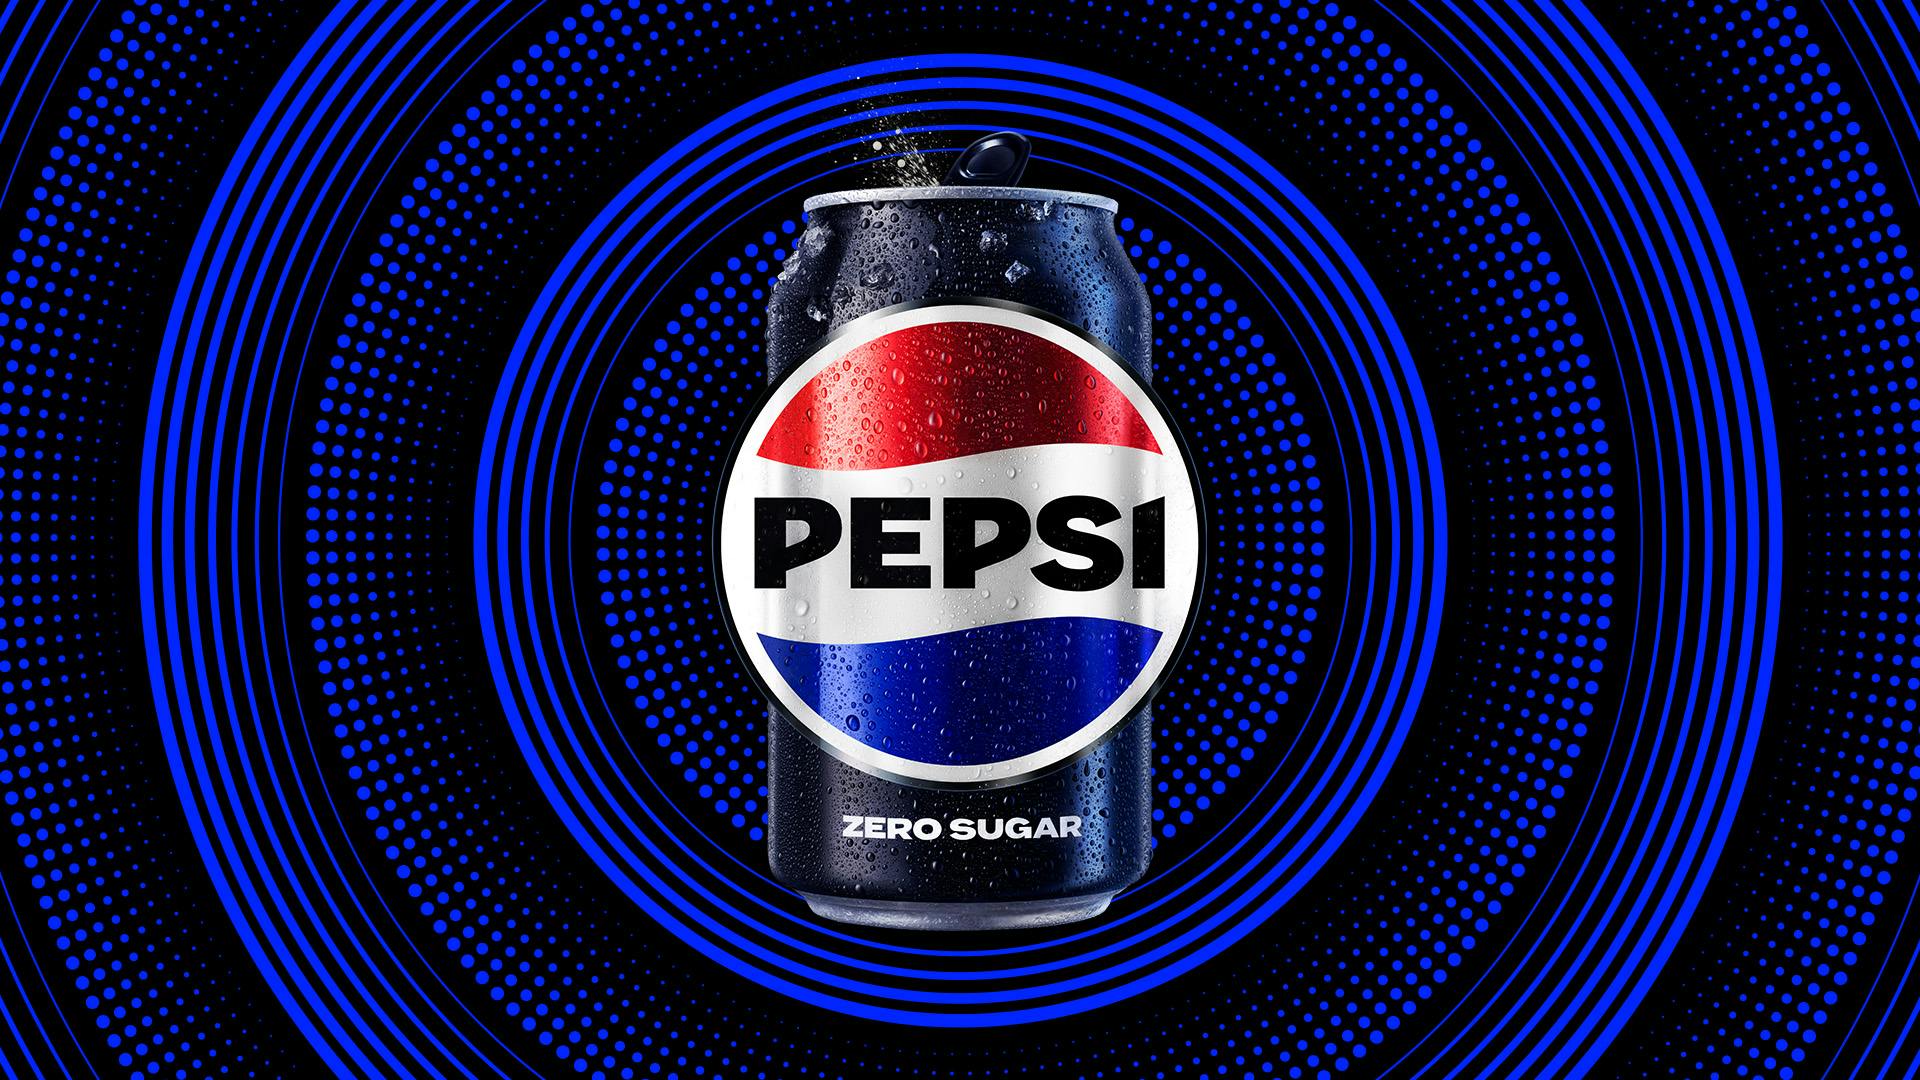 Graphic shows the new Pepsi branding on a can with a background graphic made up of lines and dots arranged in concentric circles